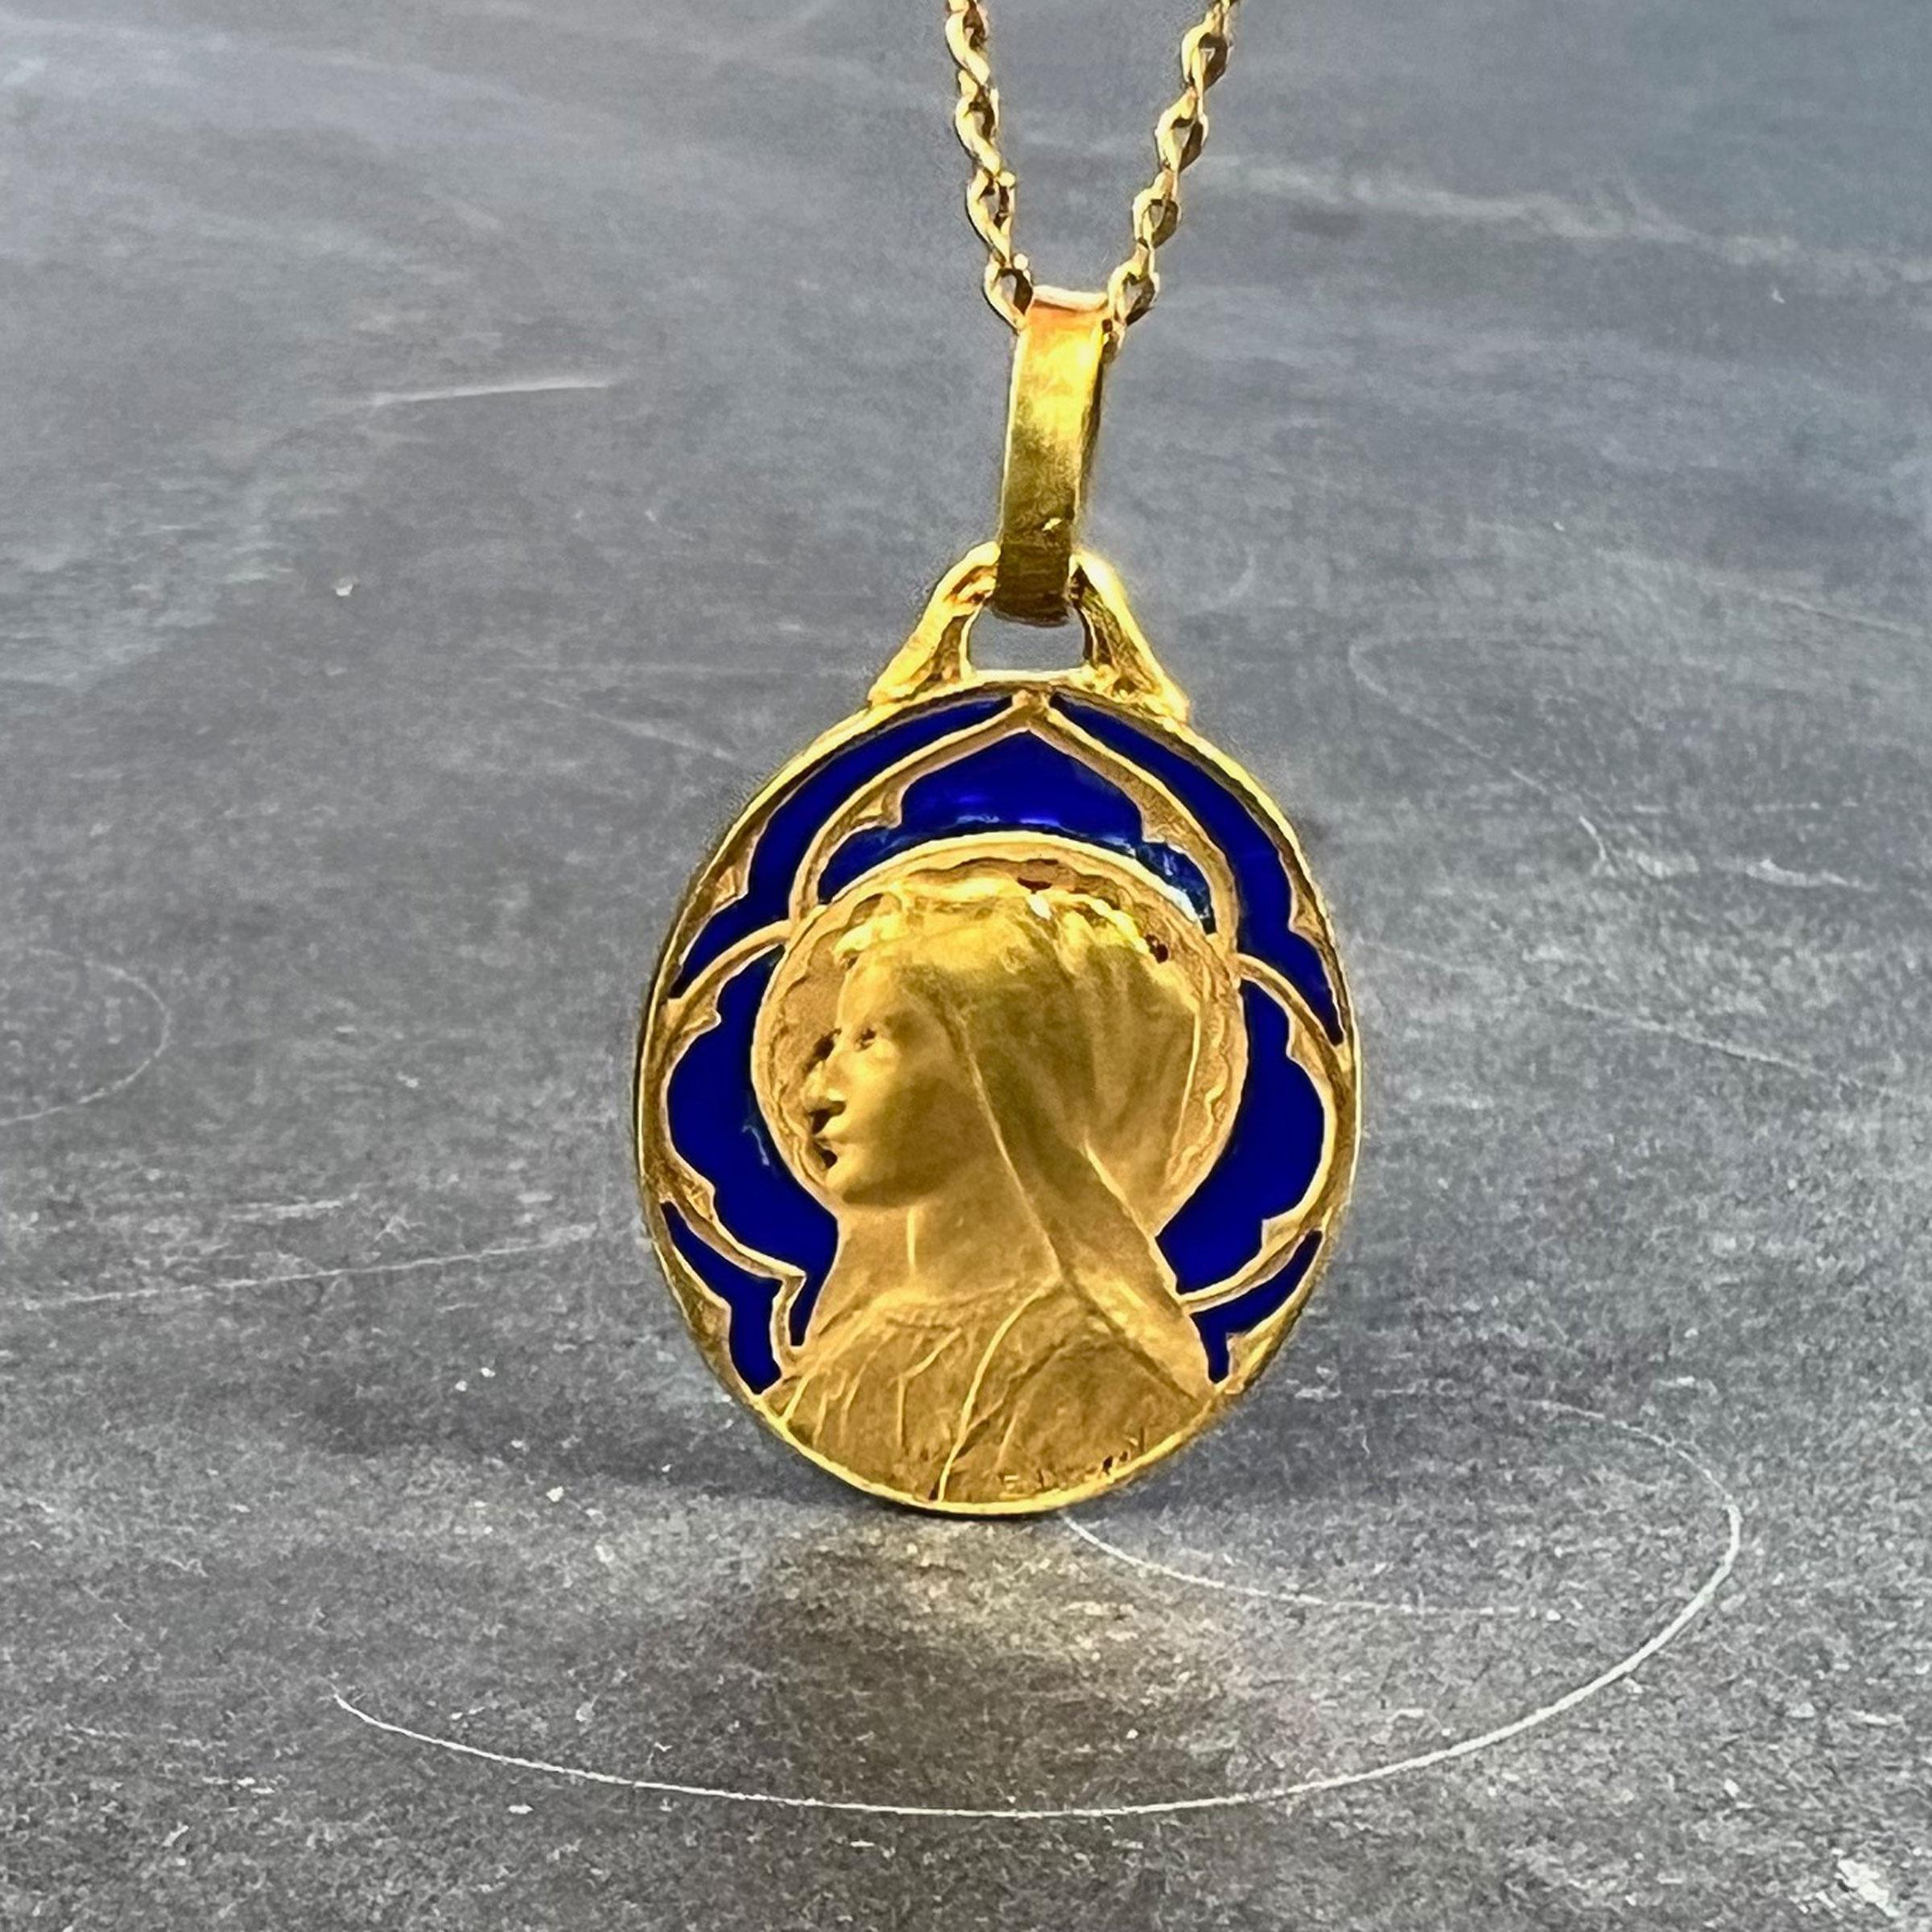 A French 18 karat (18K) yellow gold charm pendant designed as an oval medal depicting the Virgin Mary with plique a jour blue enamel surround. Signed E Dropsy, stamped with the eagle’s head for 18 karat gold and French manufacture, and a partial